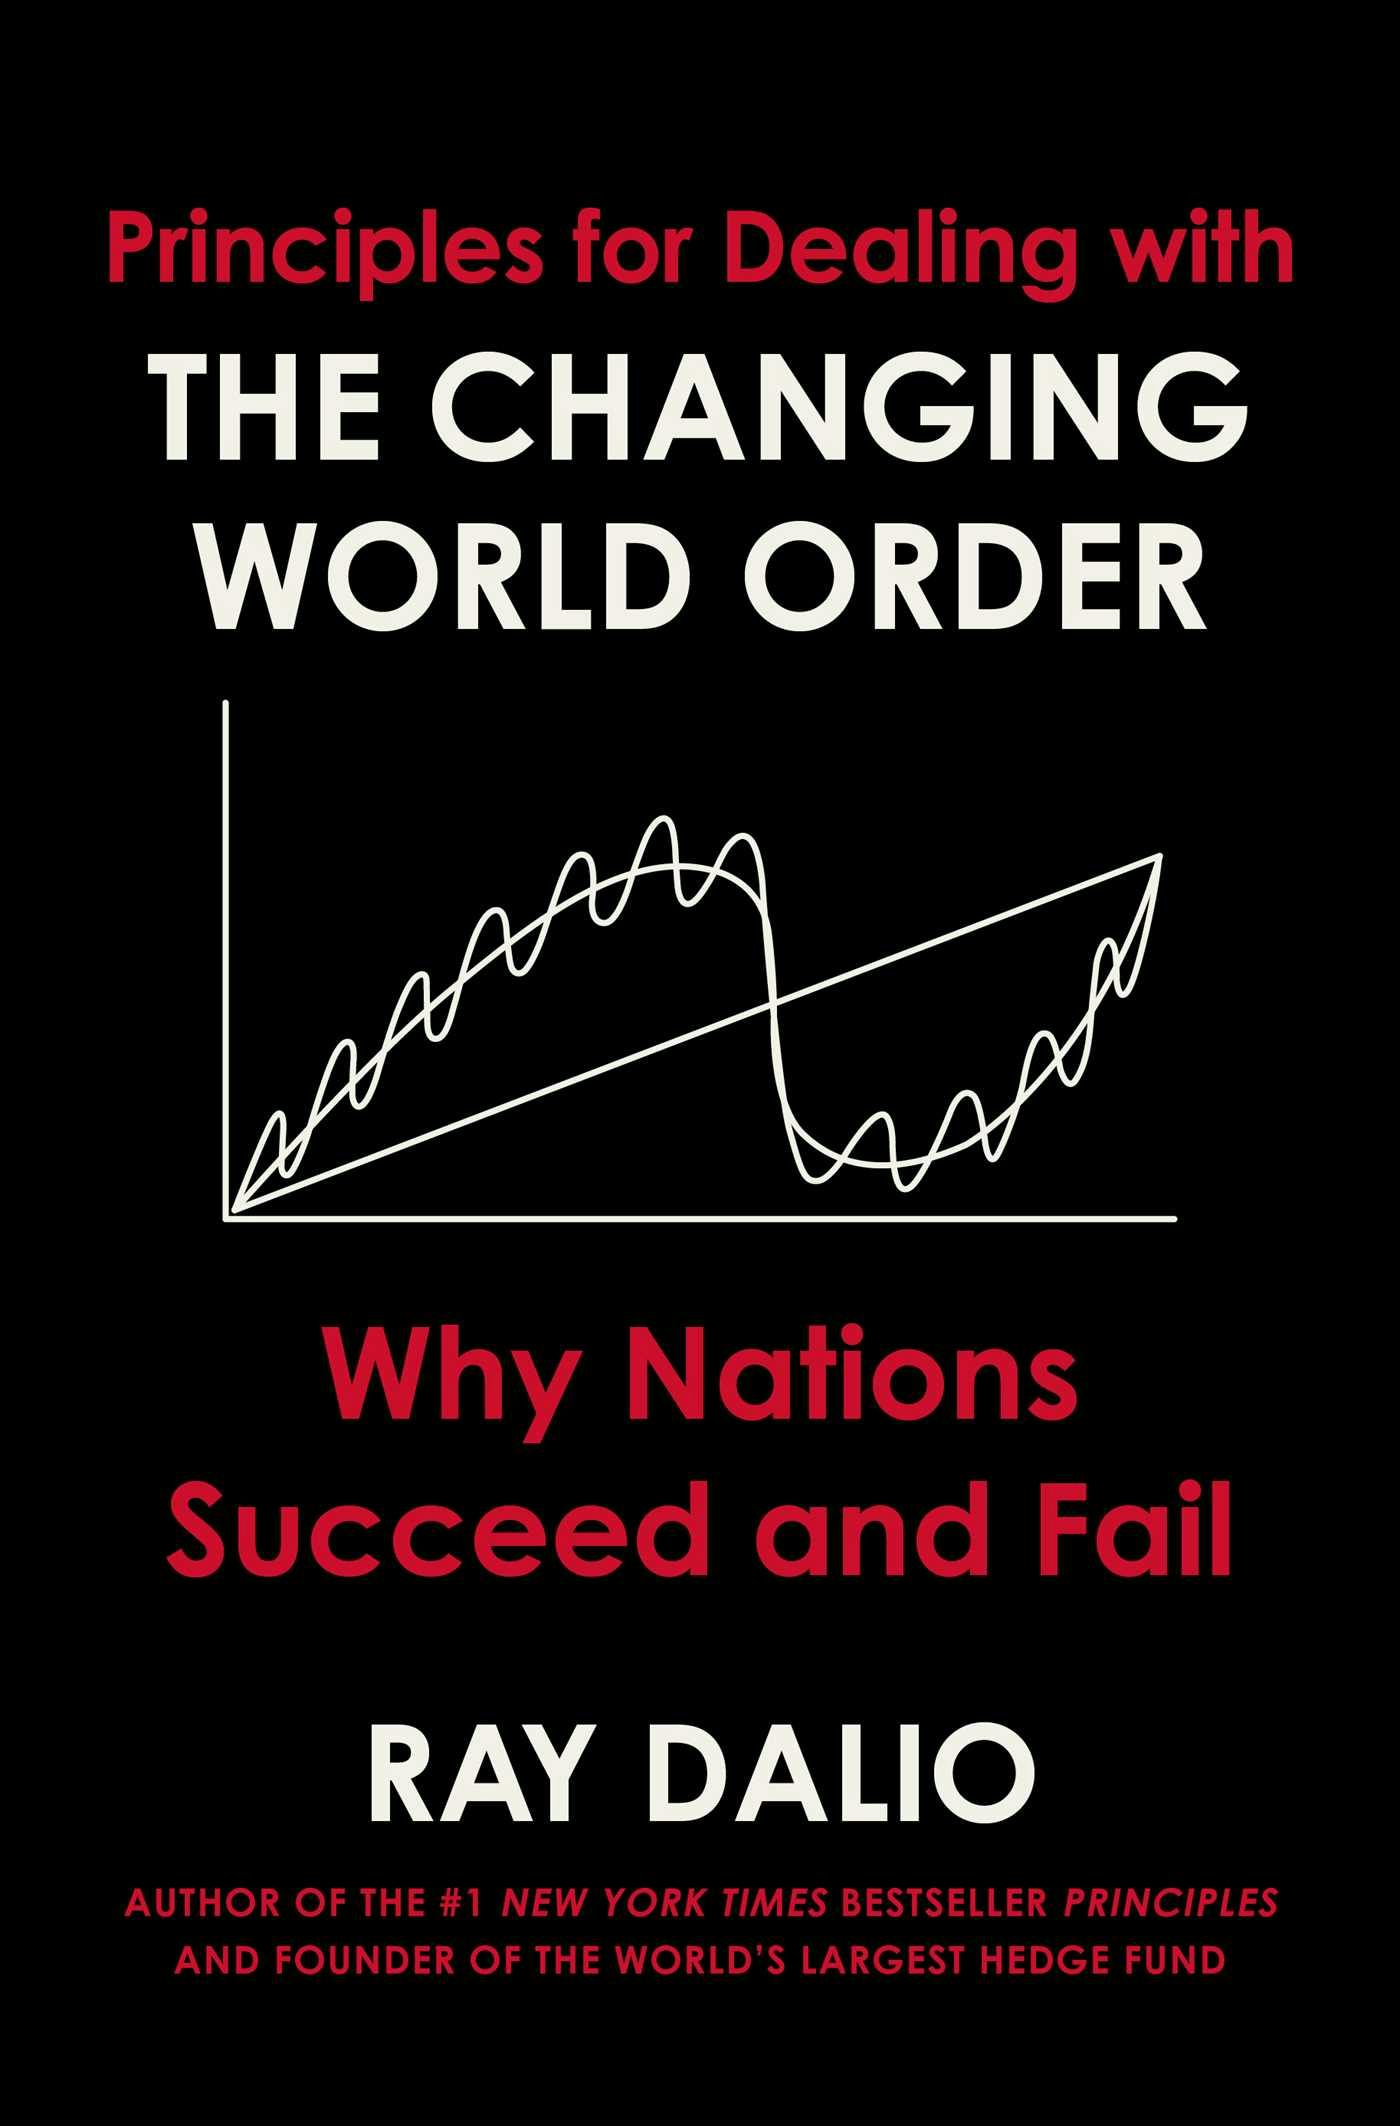 "Principles for Dealing with the Changing World Order" by "Ray Dalio"